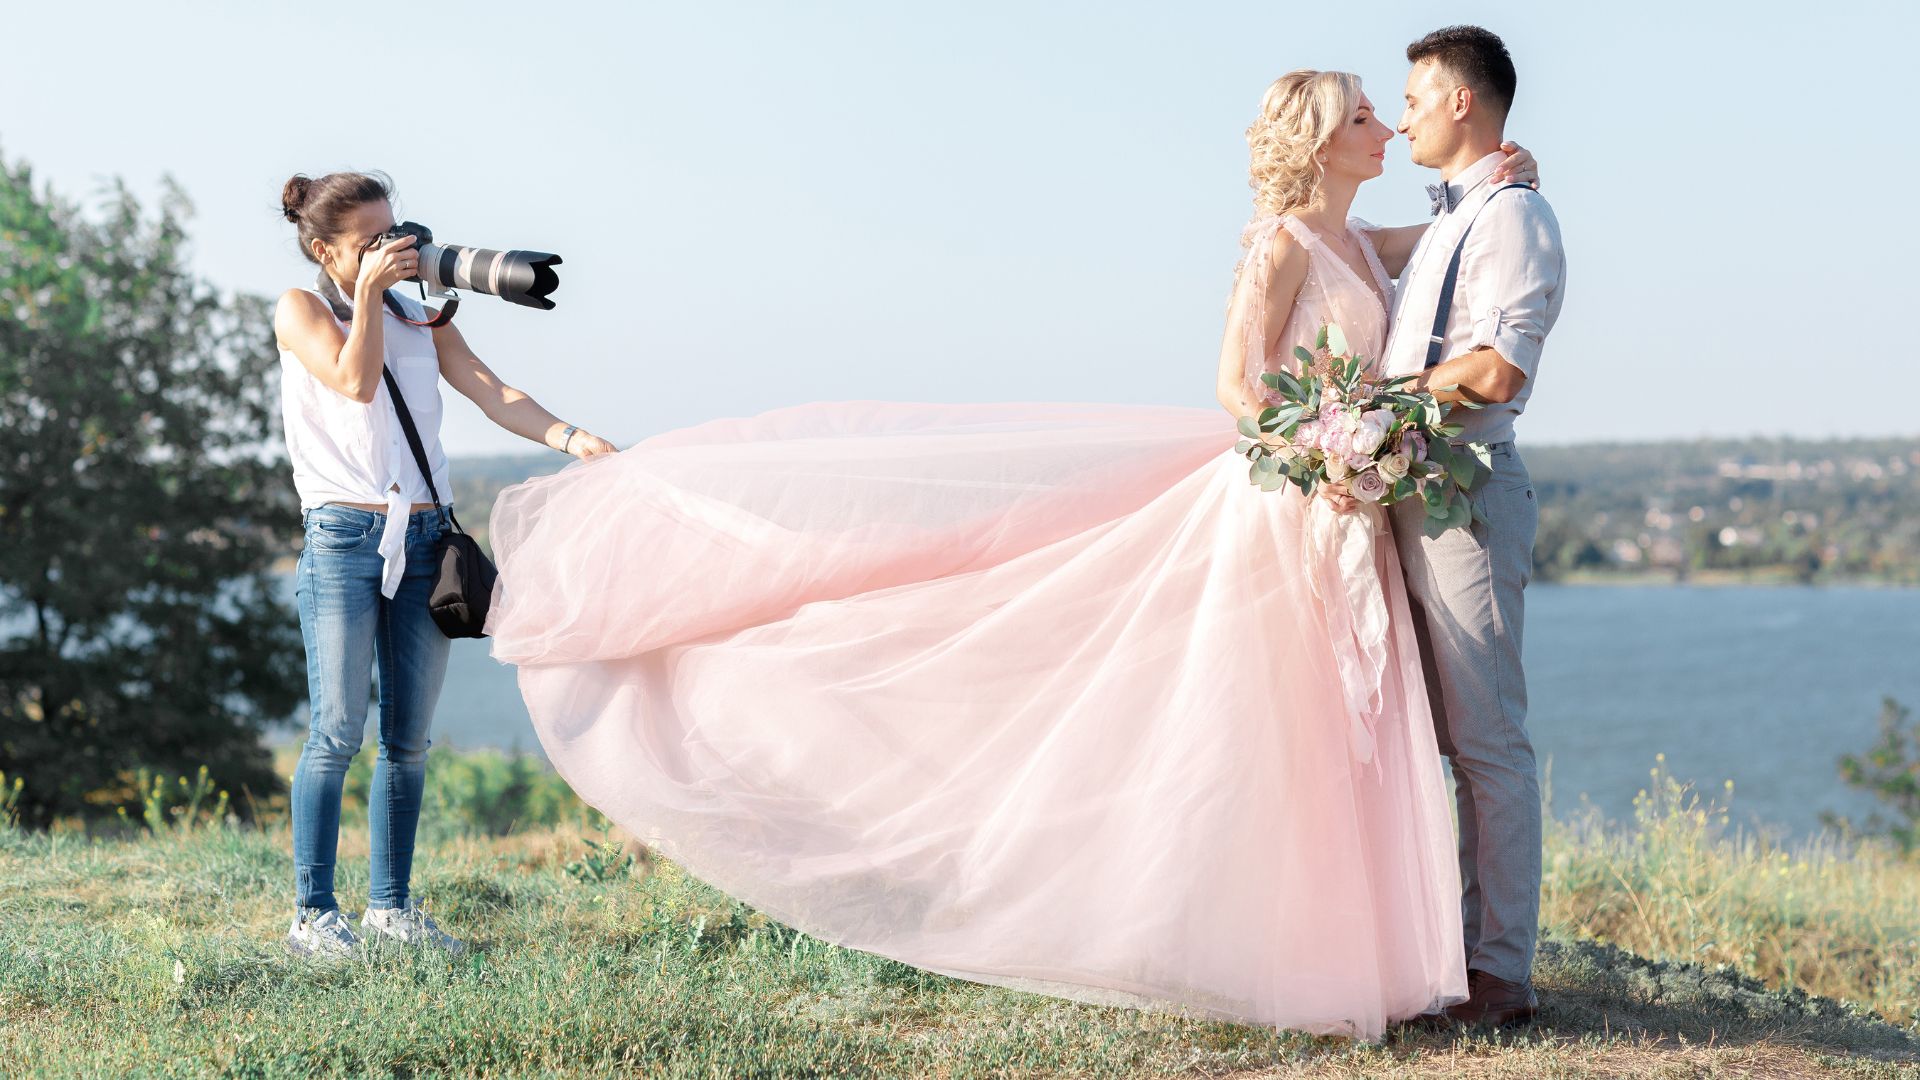 How to Find a Good Wedding Photographer?